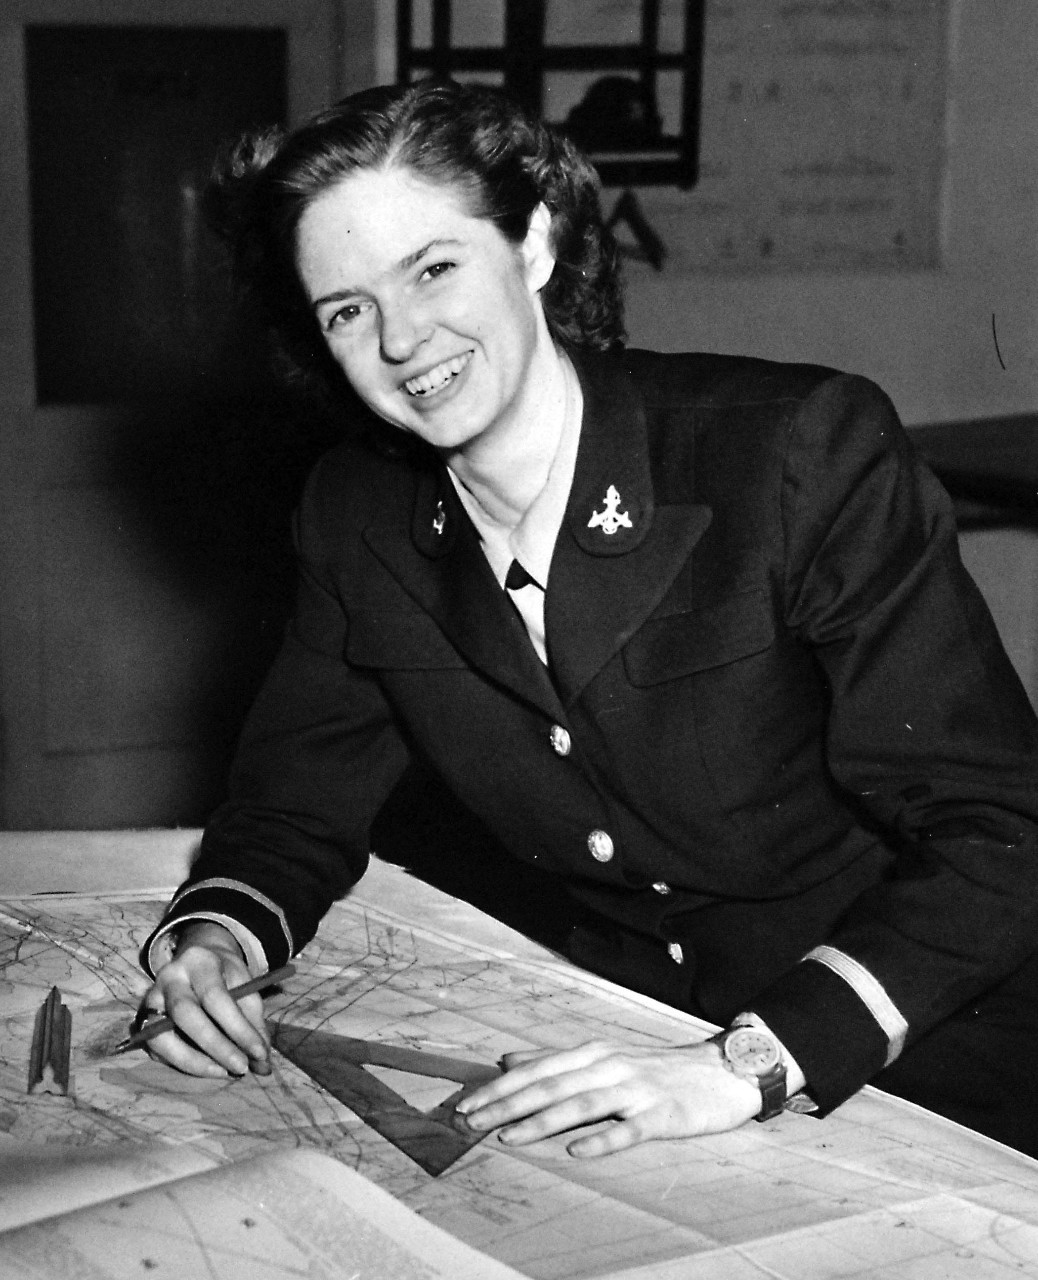 80-G-40931:  Service Dress Blue, March 1943.   Ensign Lois Brown, USNR (W).  Photographed on March 23, 1943.   Official U.S. Navy Photograph, now in the collections of the National Archives.  